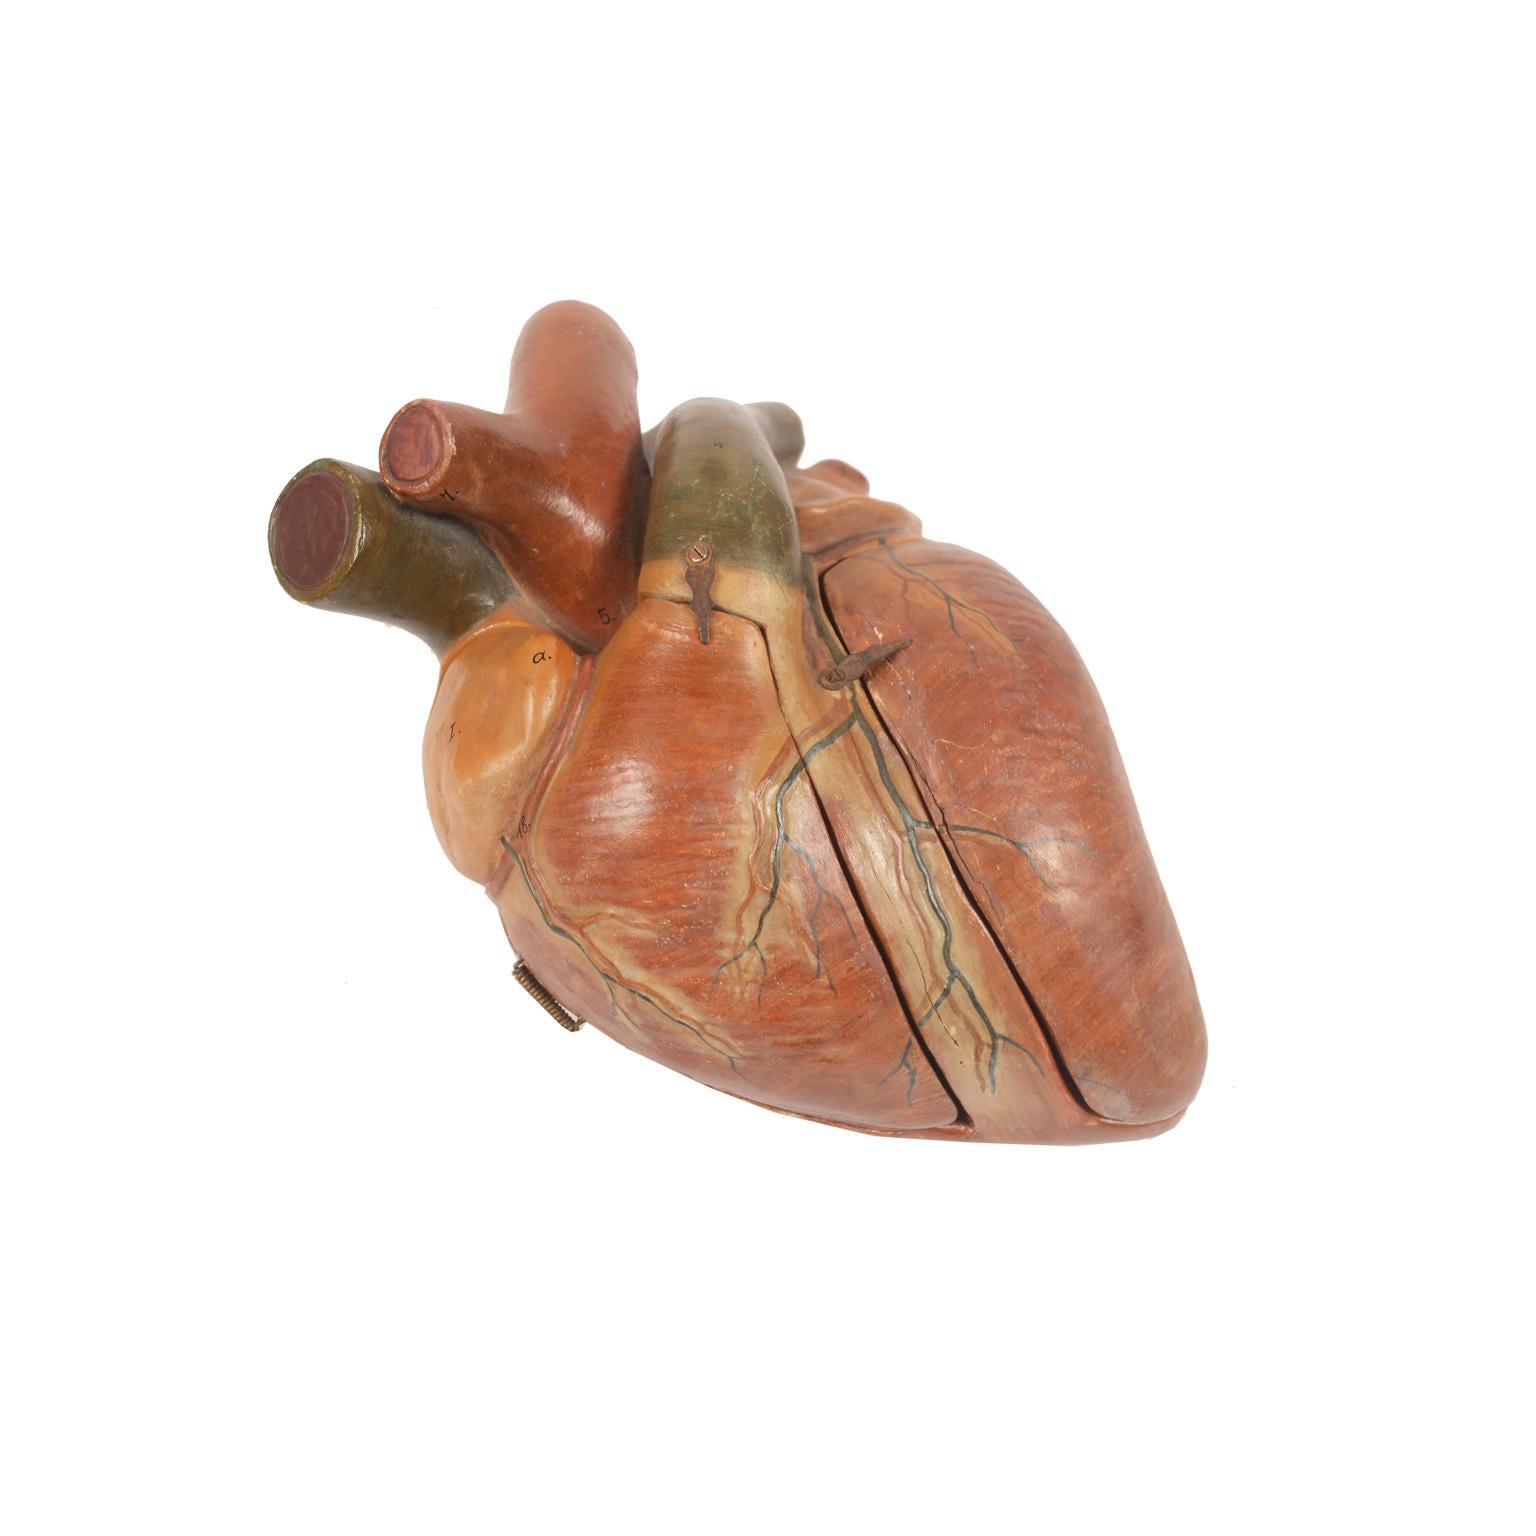 Didactic anatomical model of a human heart made of polychrome plaster. 2 doors with spring hinges allow observation of the internal parts of the heart. Probably German manufacture from the 1930s. Good condition, some chipping. Measures: 25 x 13 x 10